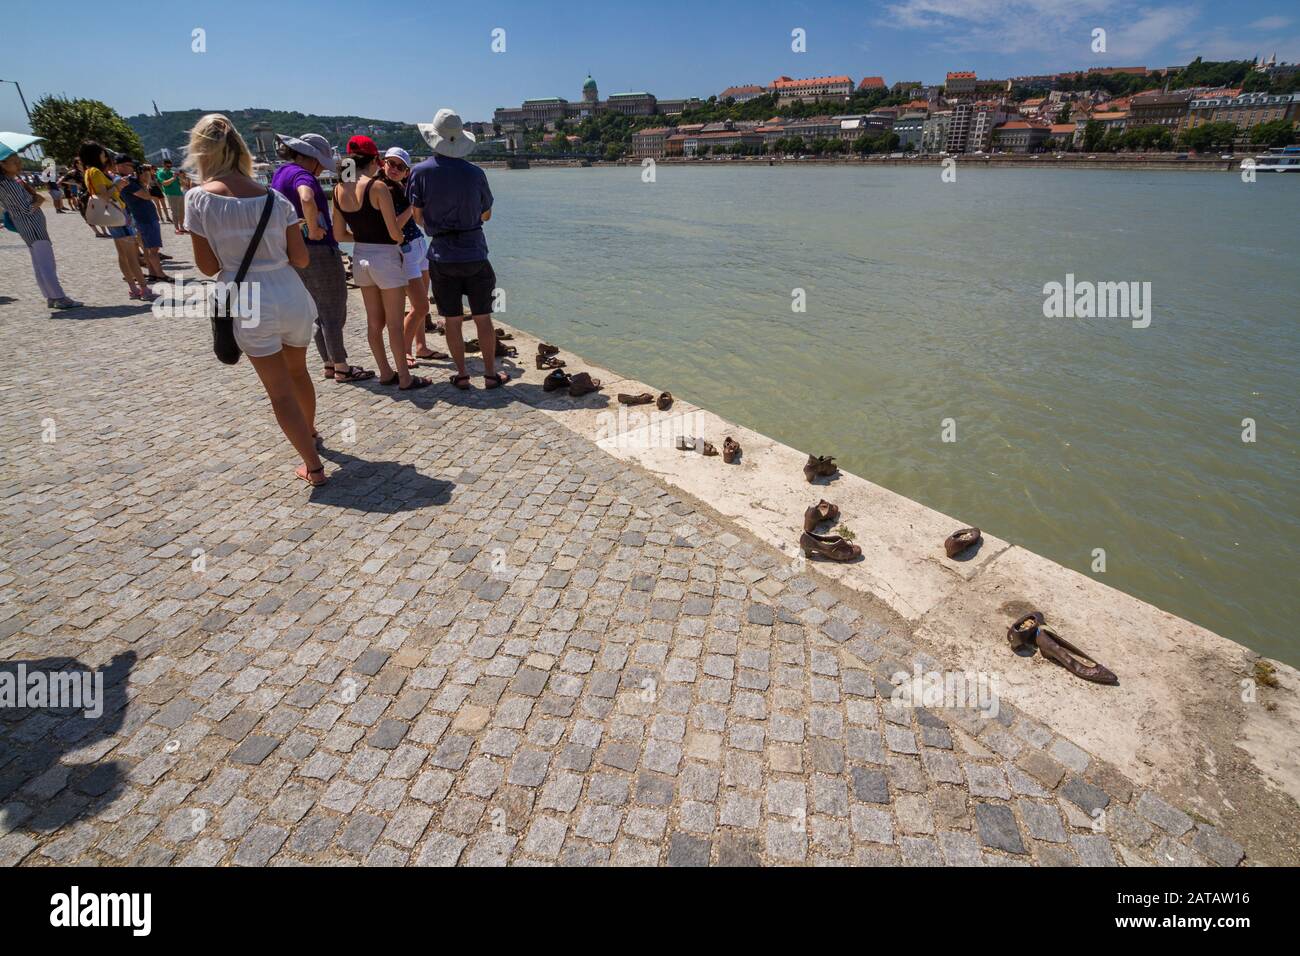 Budapest, Hungary – Tourists and  Shoes on the Danube Bank Holocaust Memorial, landscape on July  2 2019 in Hungary. Stock Photo